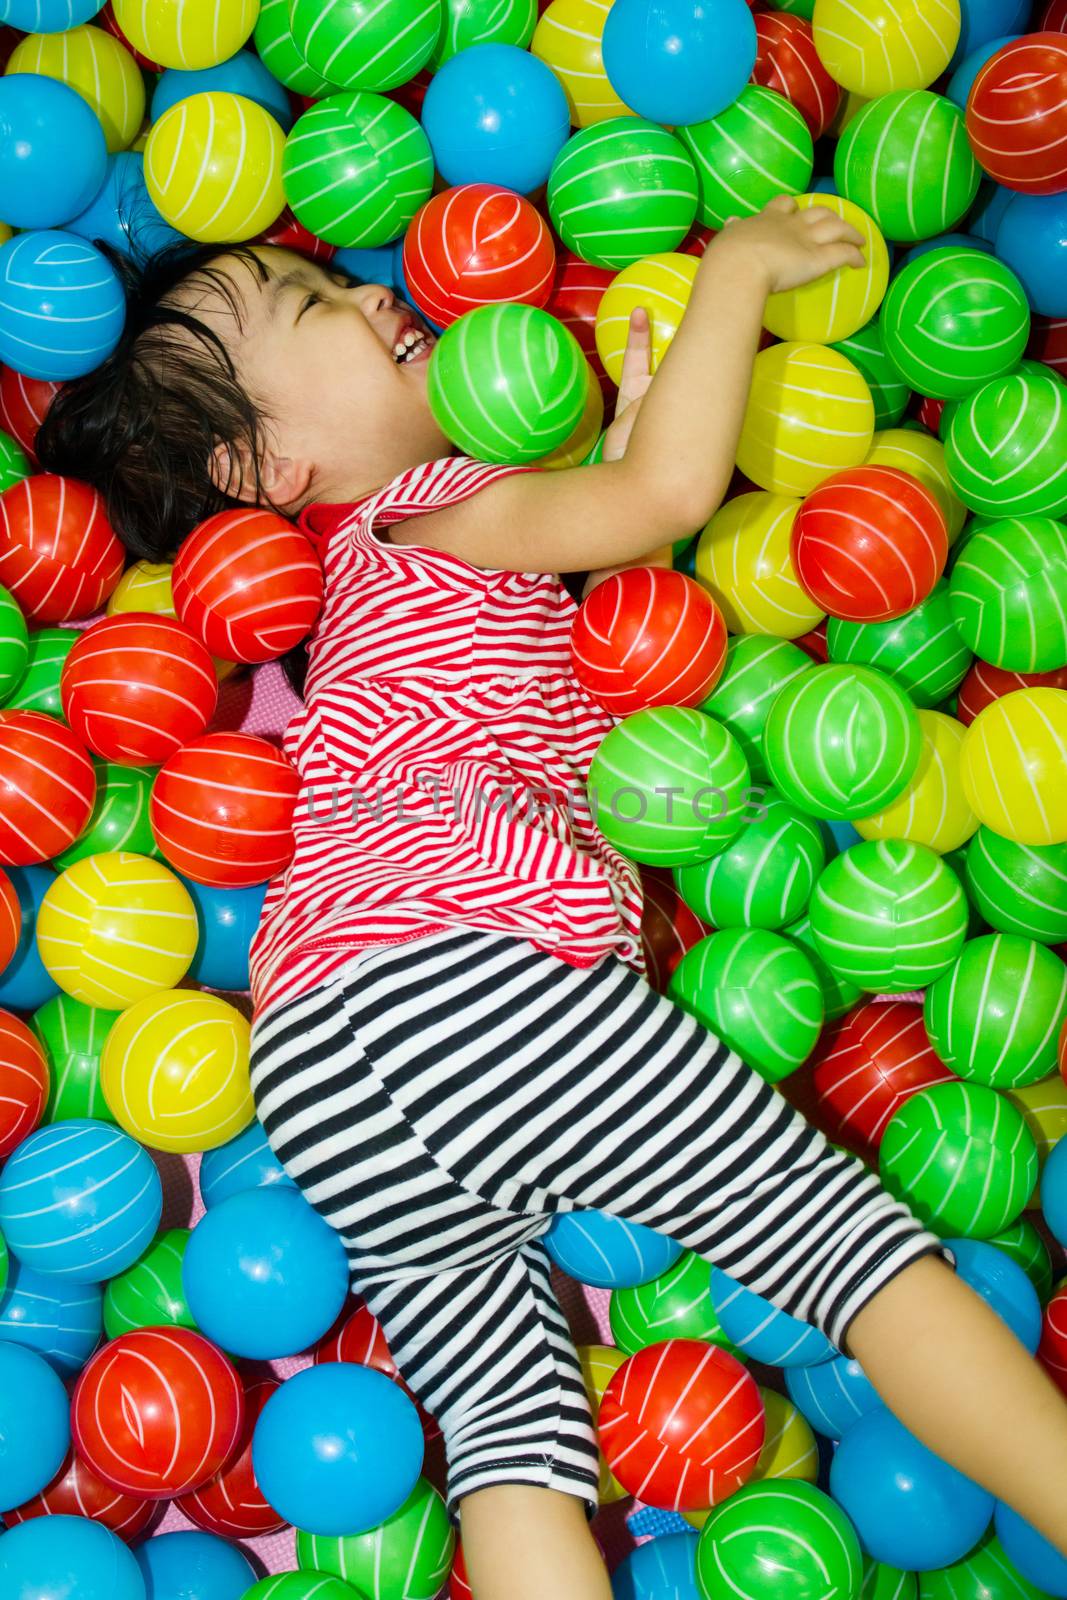 Asian Chinese Girl In Ball Pool by kiankhoon